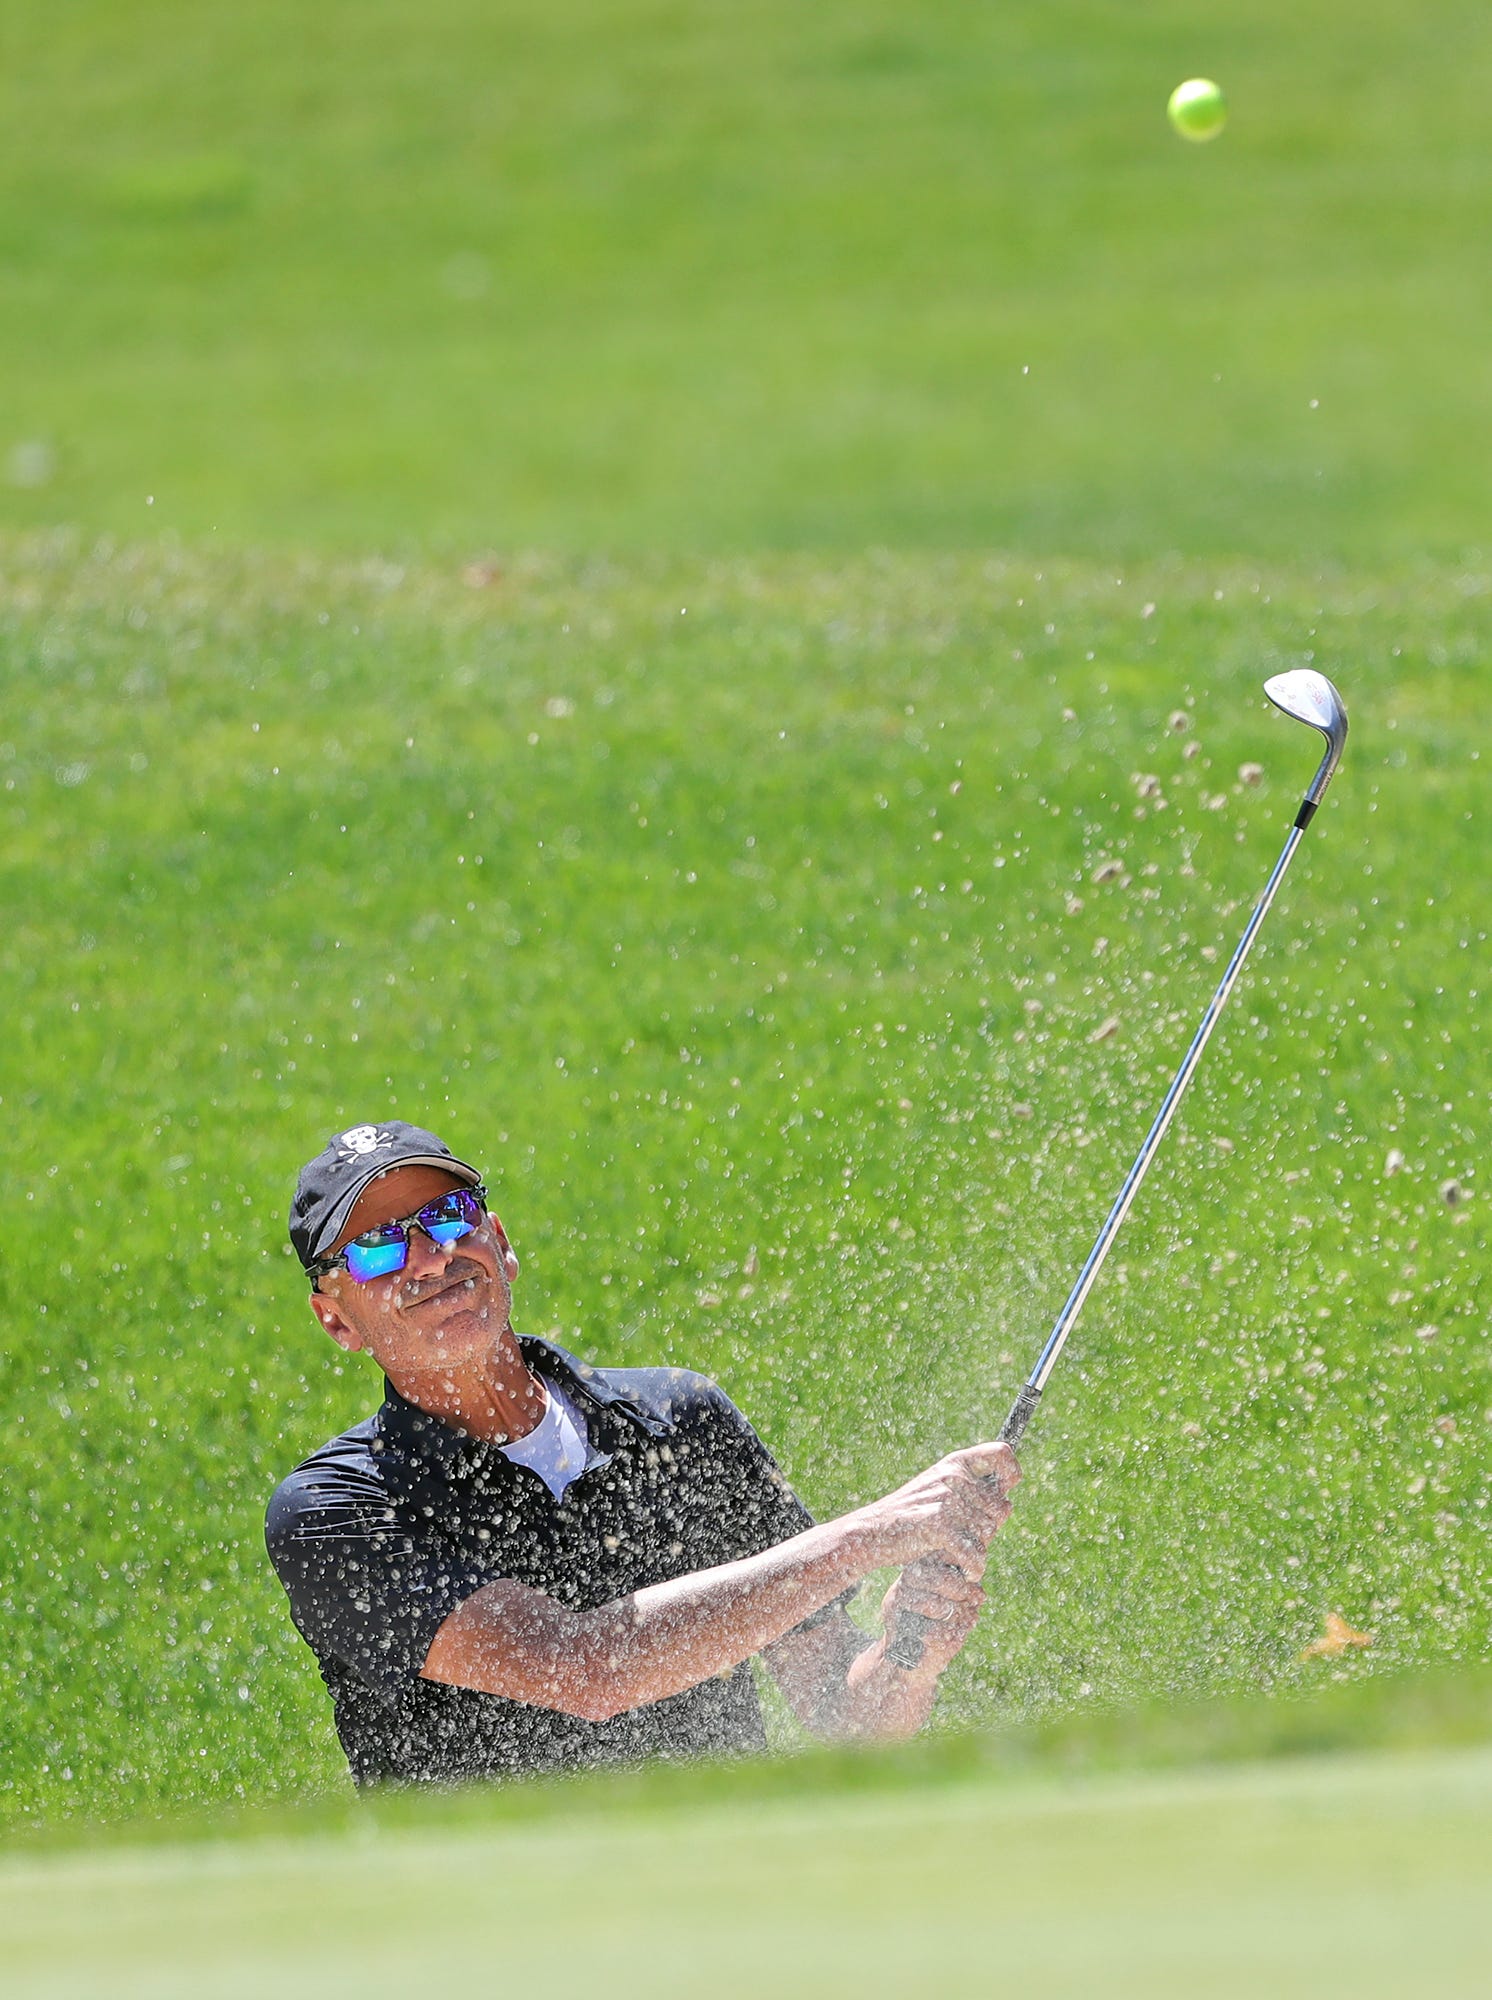 Rocco Mediate plays out of the bunker on the 6th hole during first round of the Bridgestone Senior Players Tournament at Firestone Country Club on Thursday.